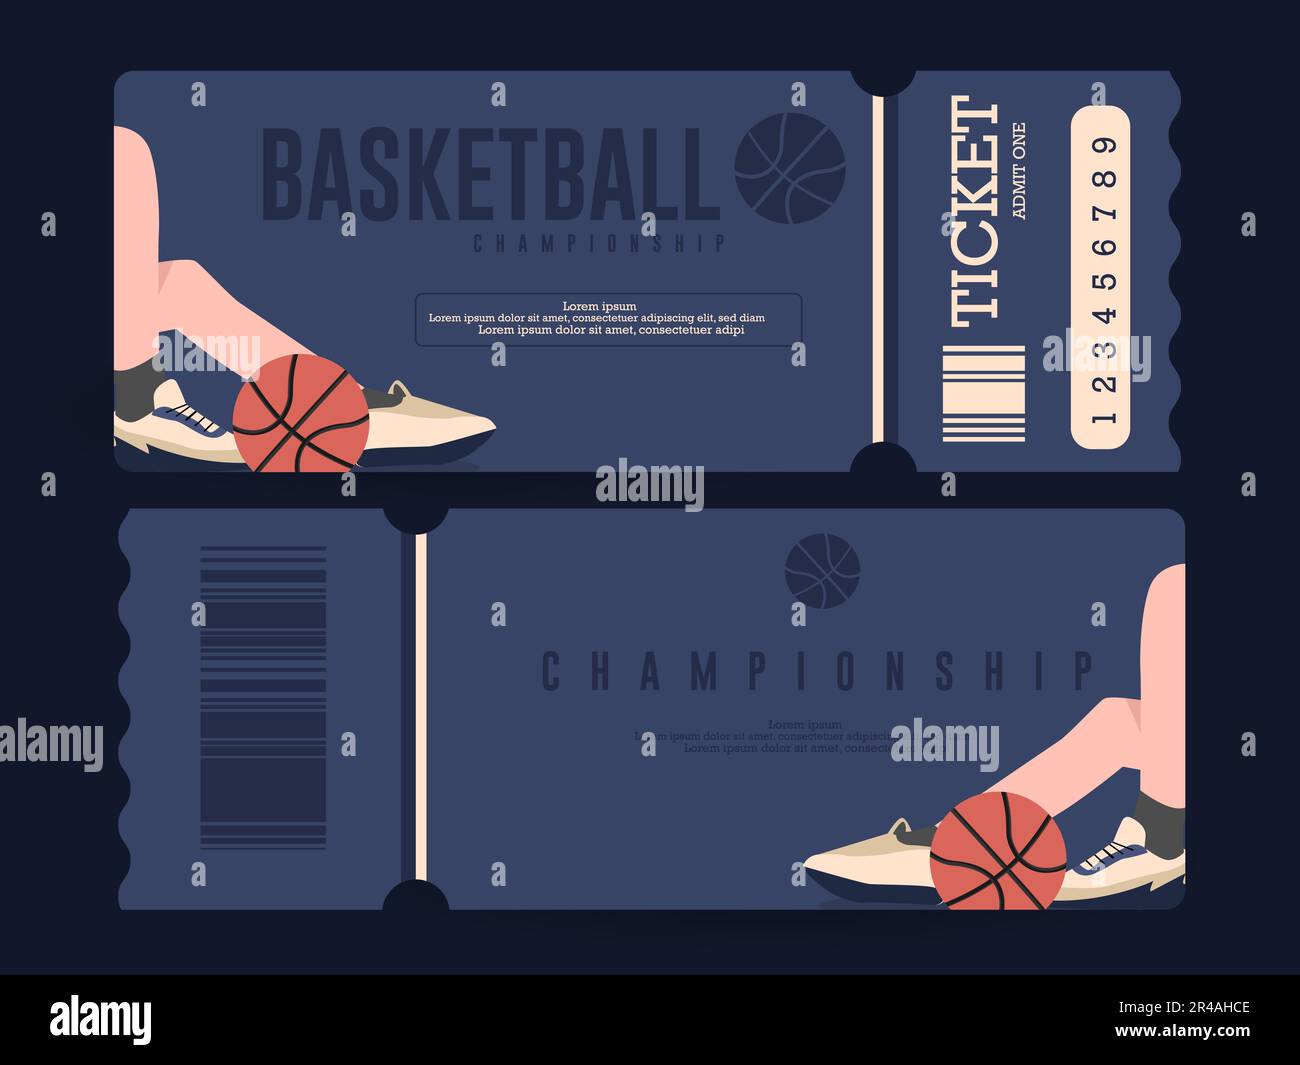 The basketball championship ticket for admitting one. Template and ticket poster design vector illustration. Stock Vector